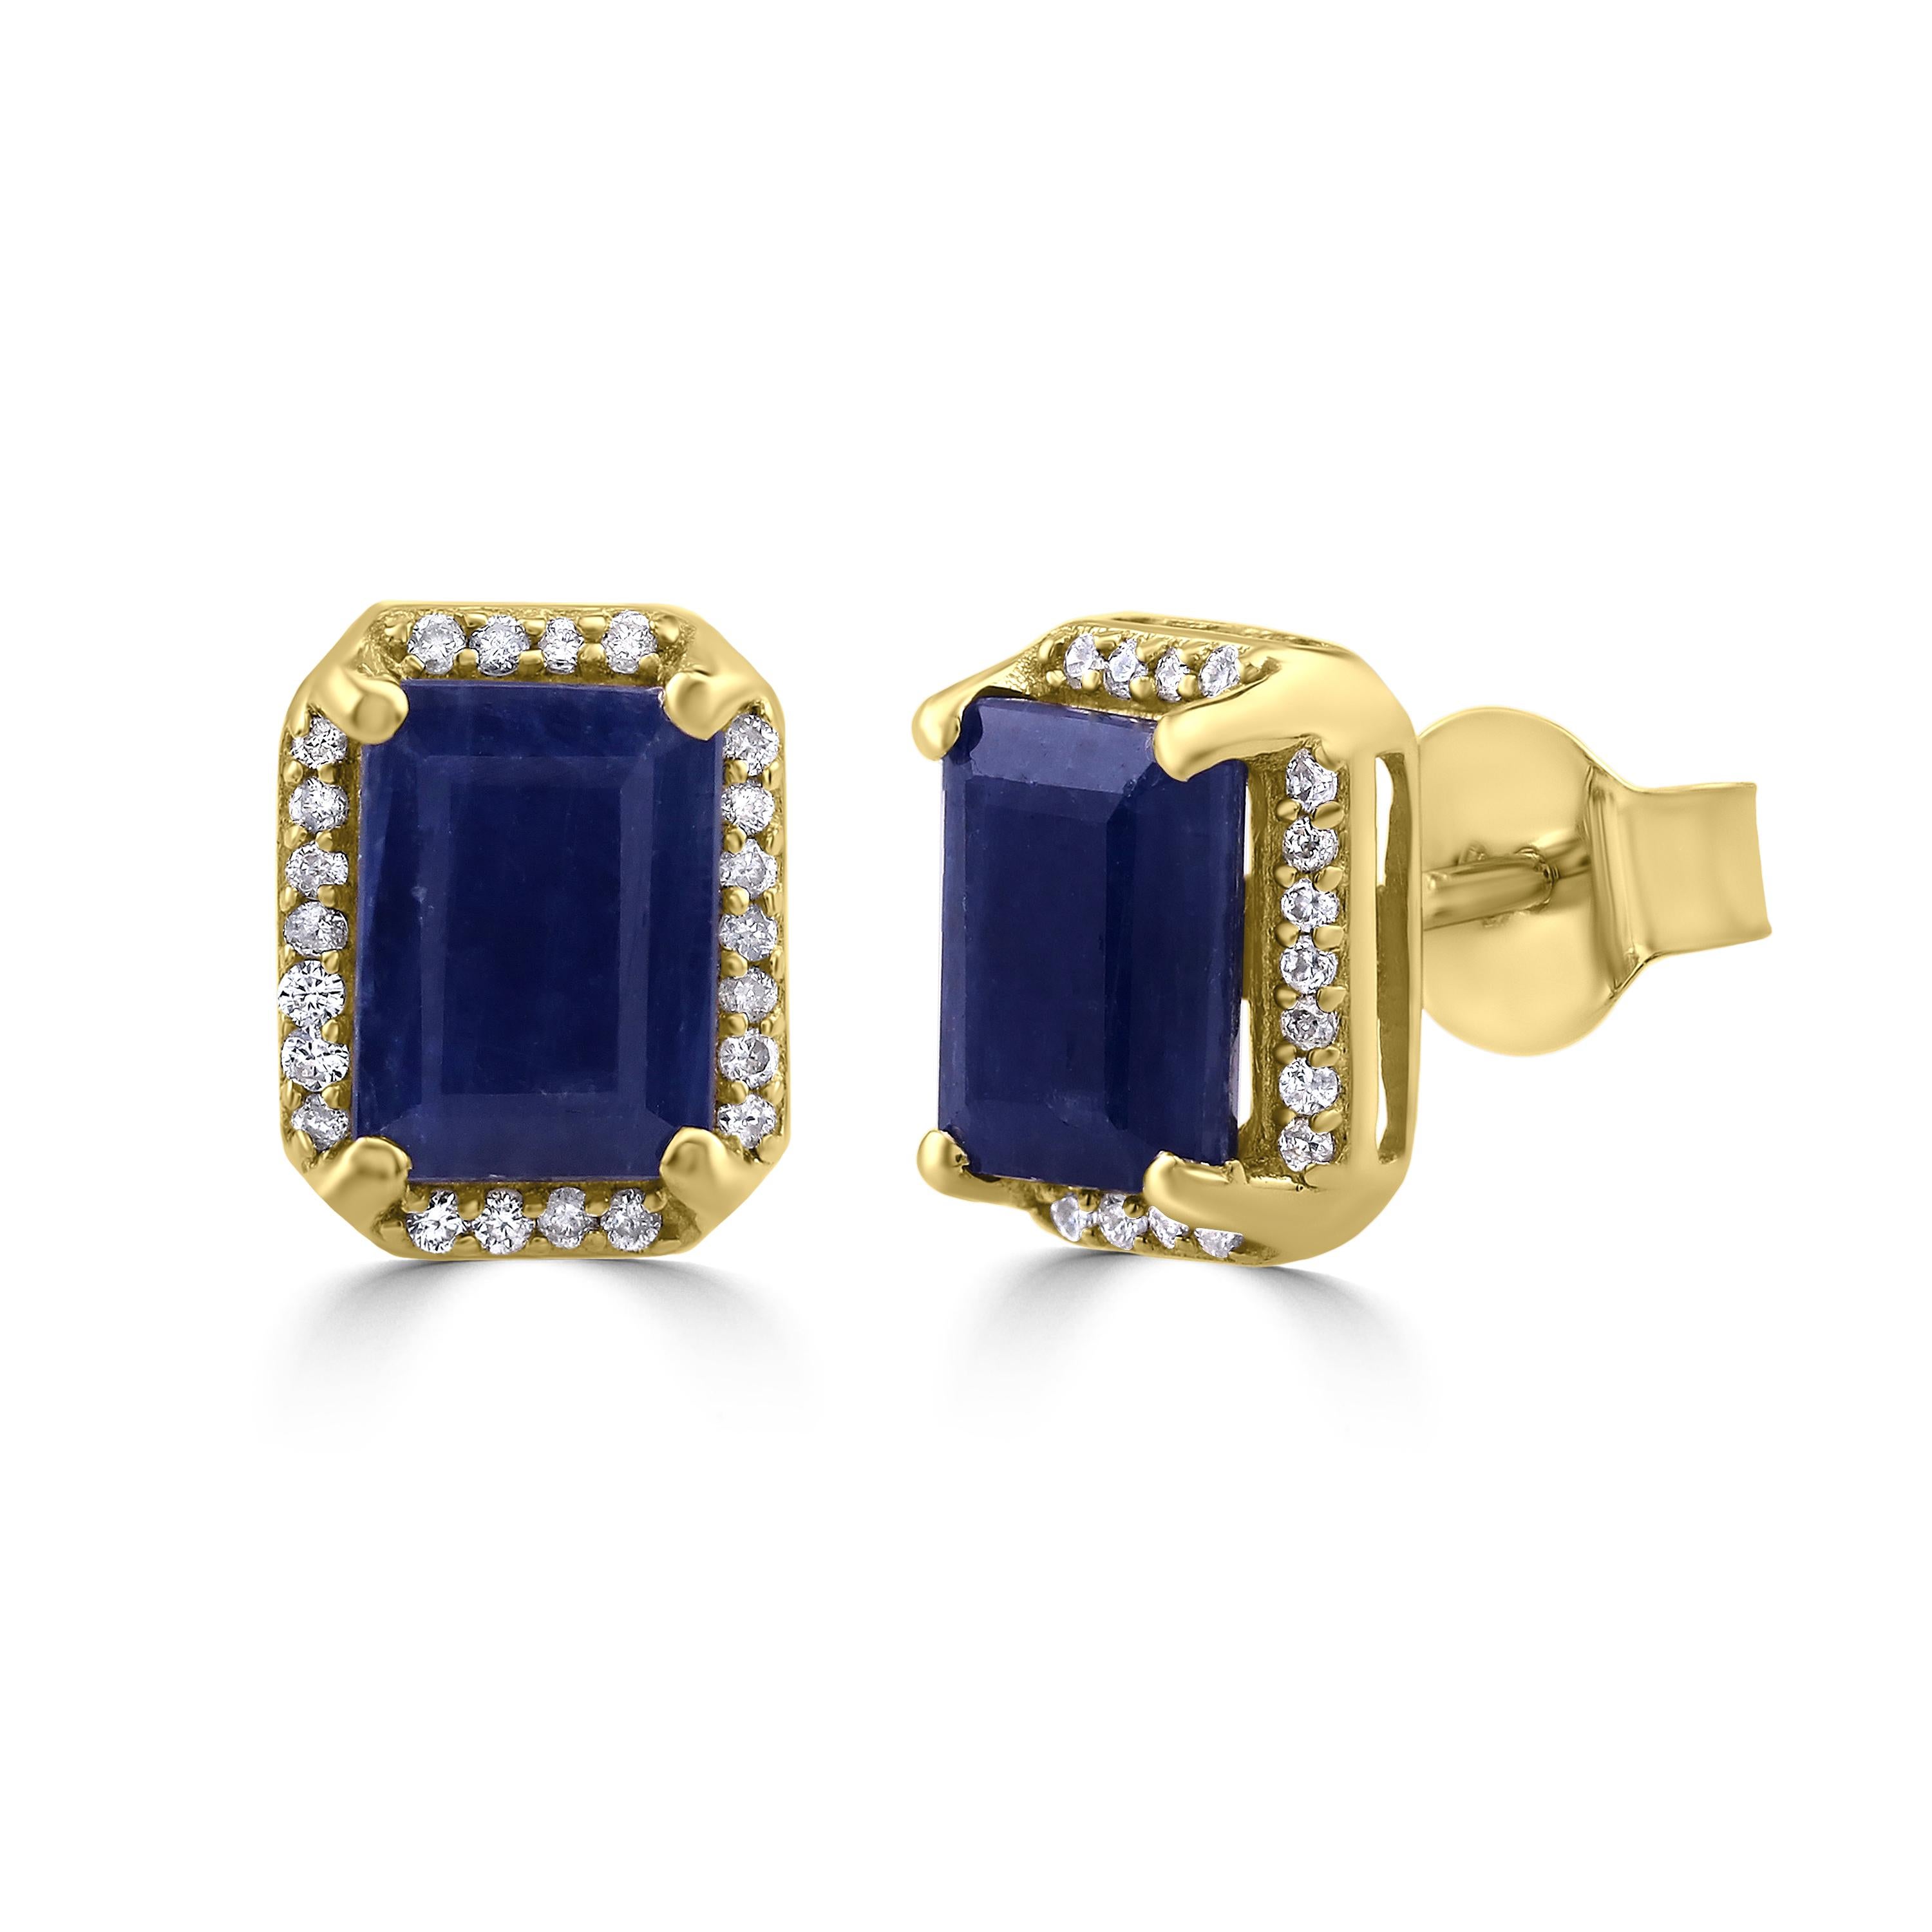 Some of the world's most desirable gemstones come together ! These Gemistry stud earrings boast of 2.9 carat emerald cut blue sapphires at the center in four prongs accentuated by a halo of round and brilliant cut diamonds prong set in 14k yellow